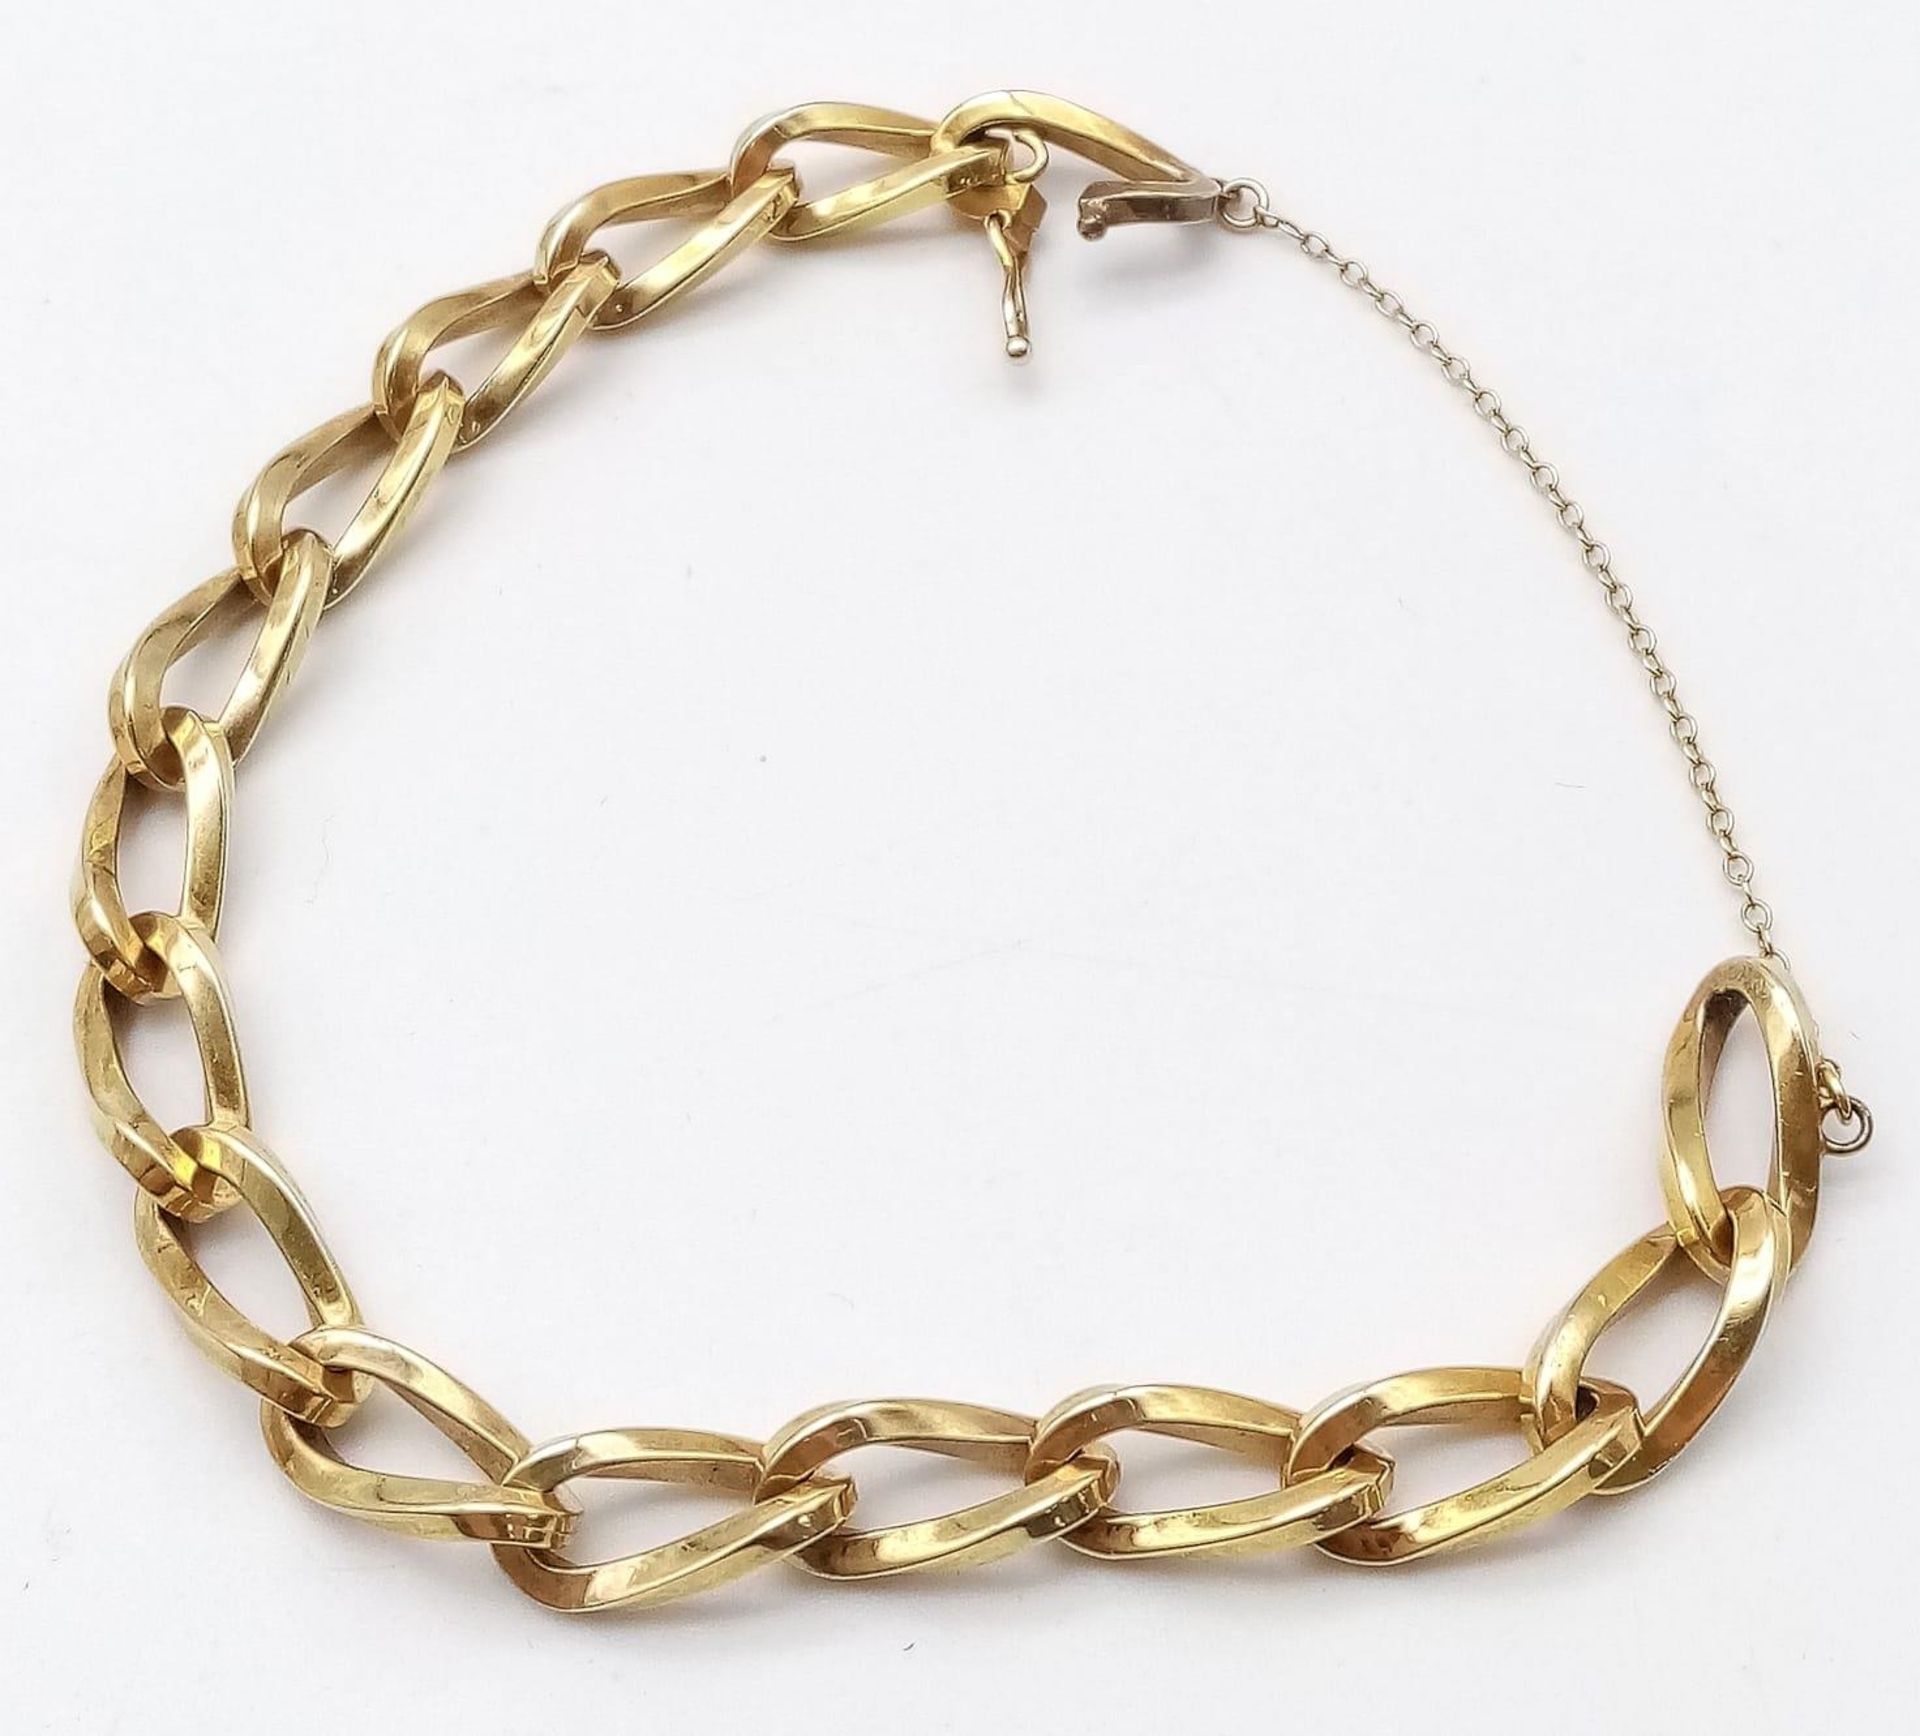 A Vintage Chunky 9K Yellow Gold Curb Link Bracelet. 19cm. 25.45g weight. - Image 2 of 5